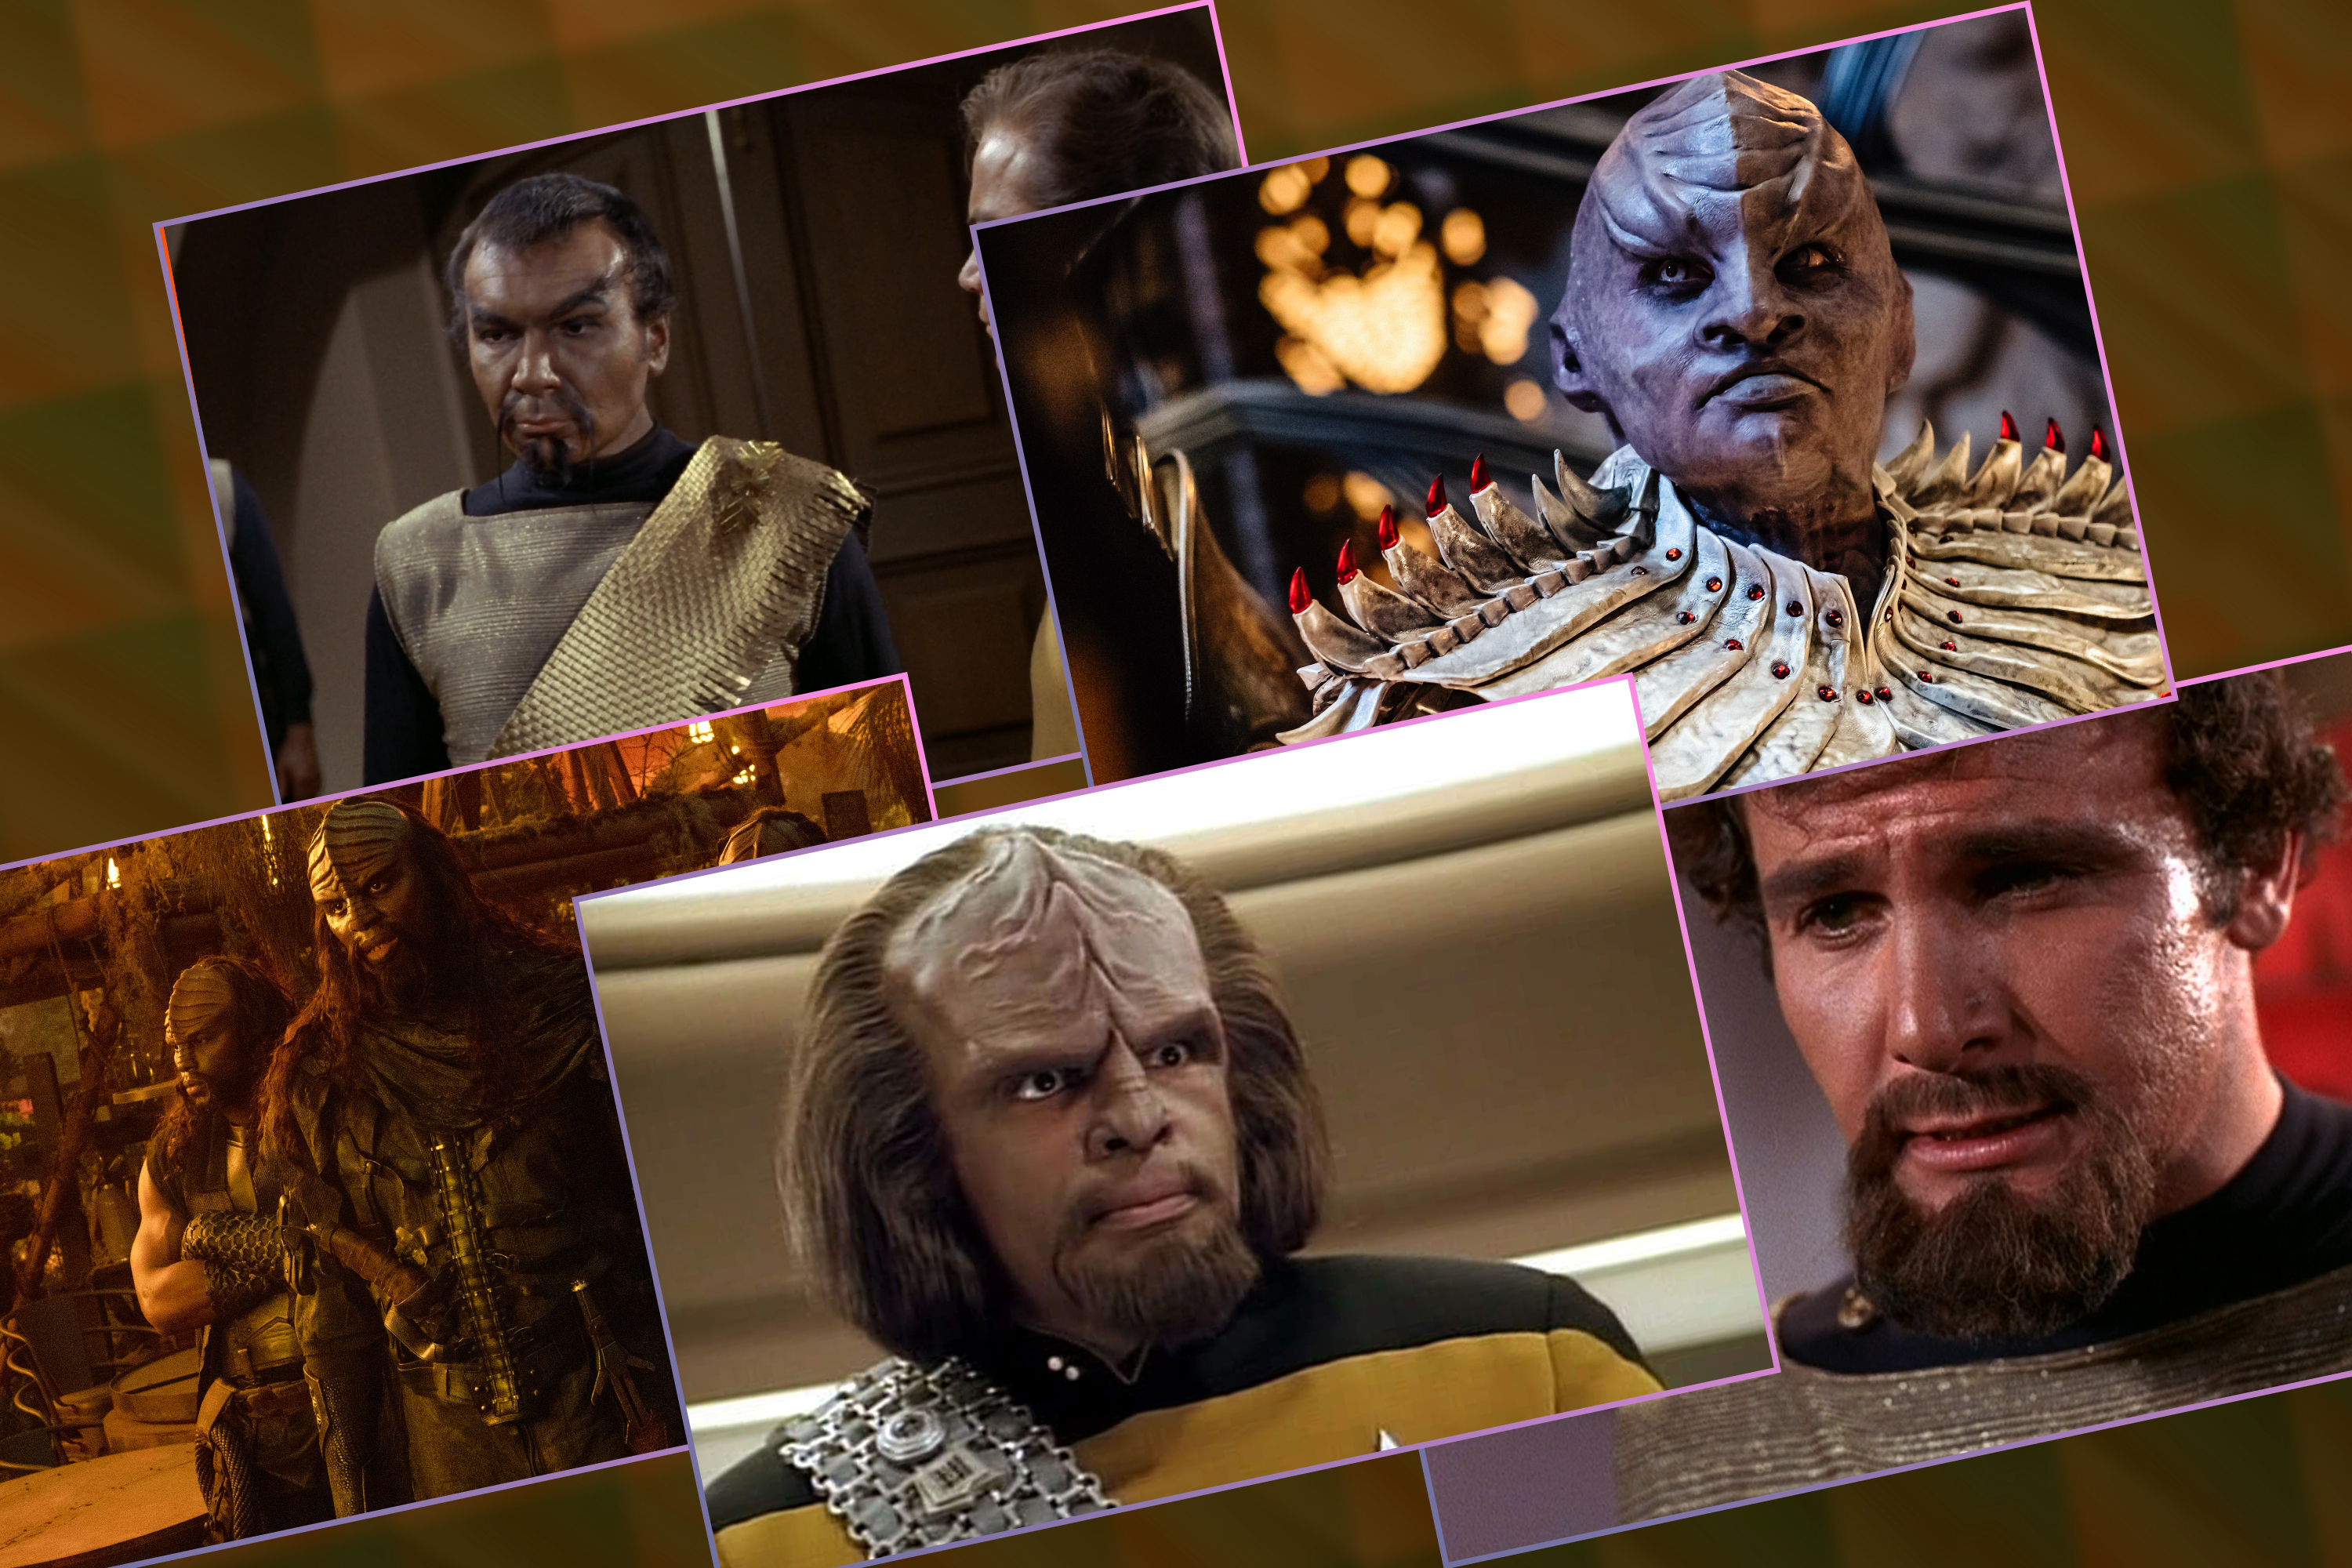 A grid of images of Klingons from Star Trek The Original Series, Discovery, Deep Space 9, The Next Generation and Strange New Worlds, all with slightly different looks